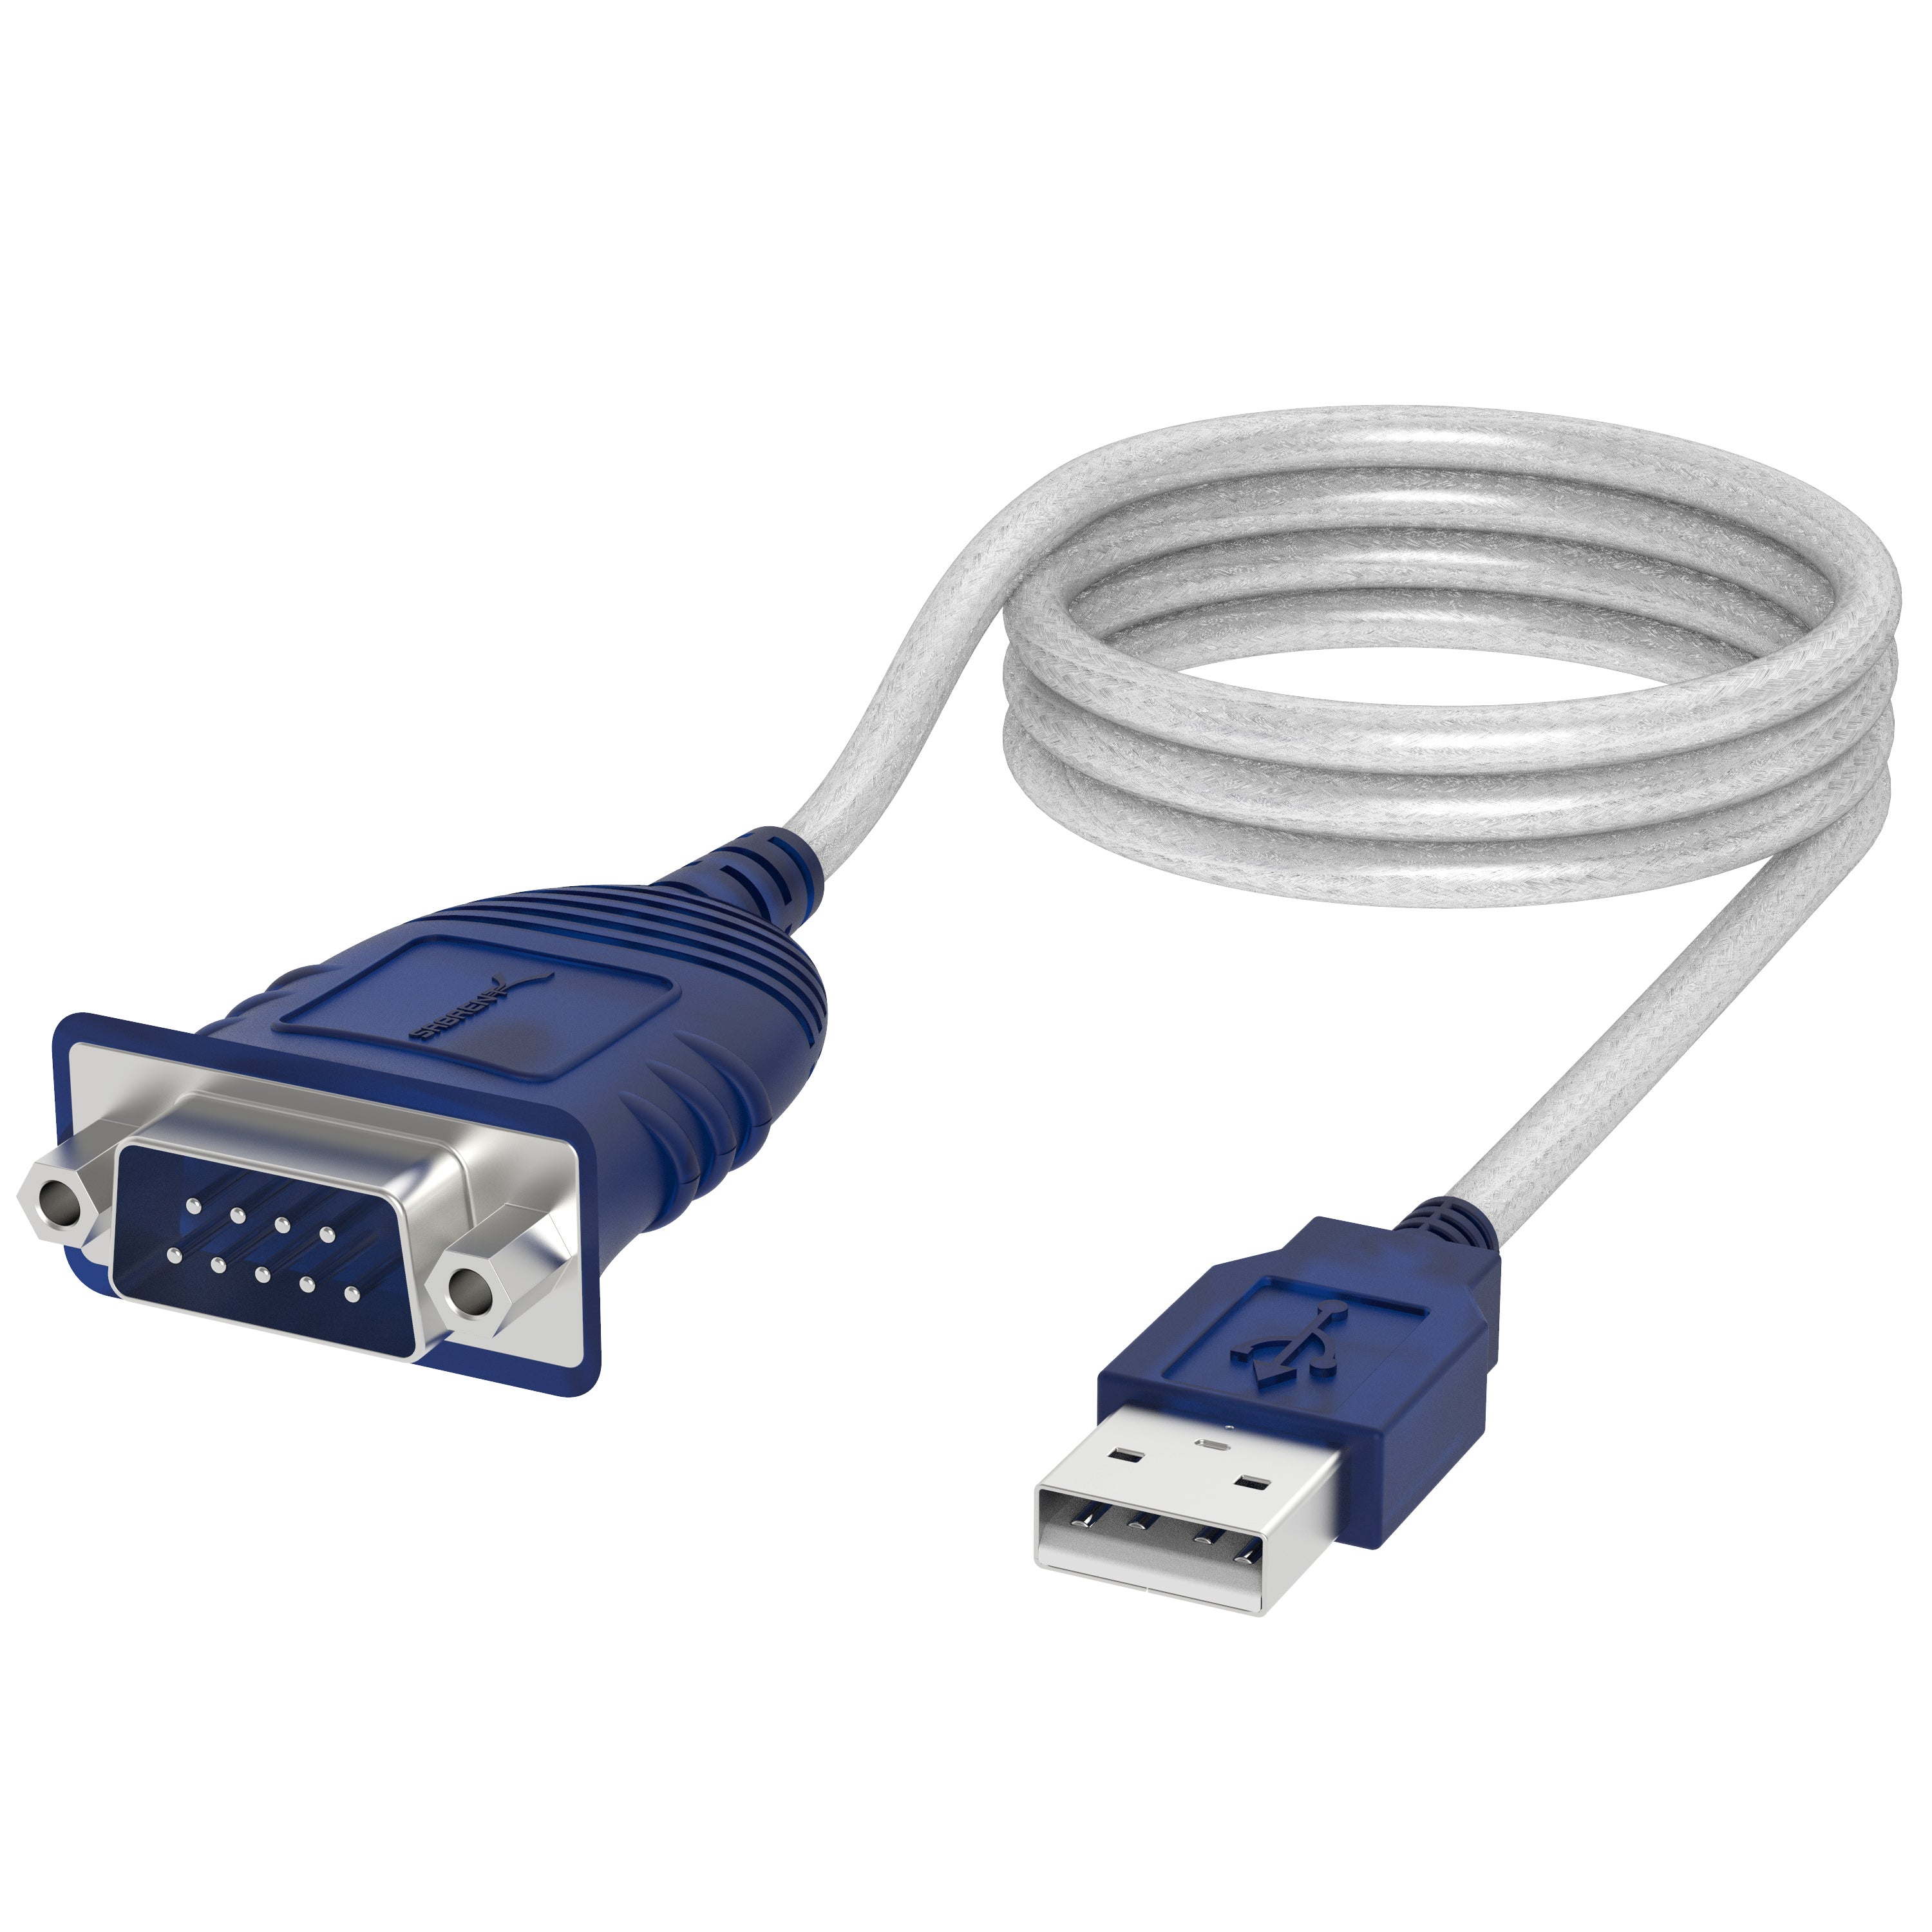 USB 2.0 To Serial DB9 Male (9 Pin) RS232 Cable Adapter - Sabrent